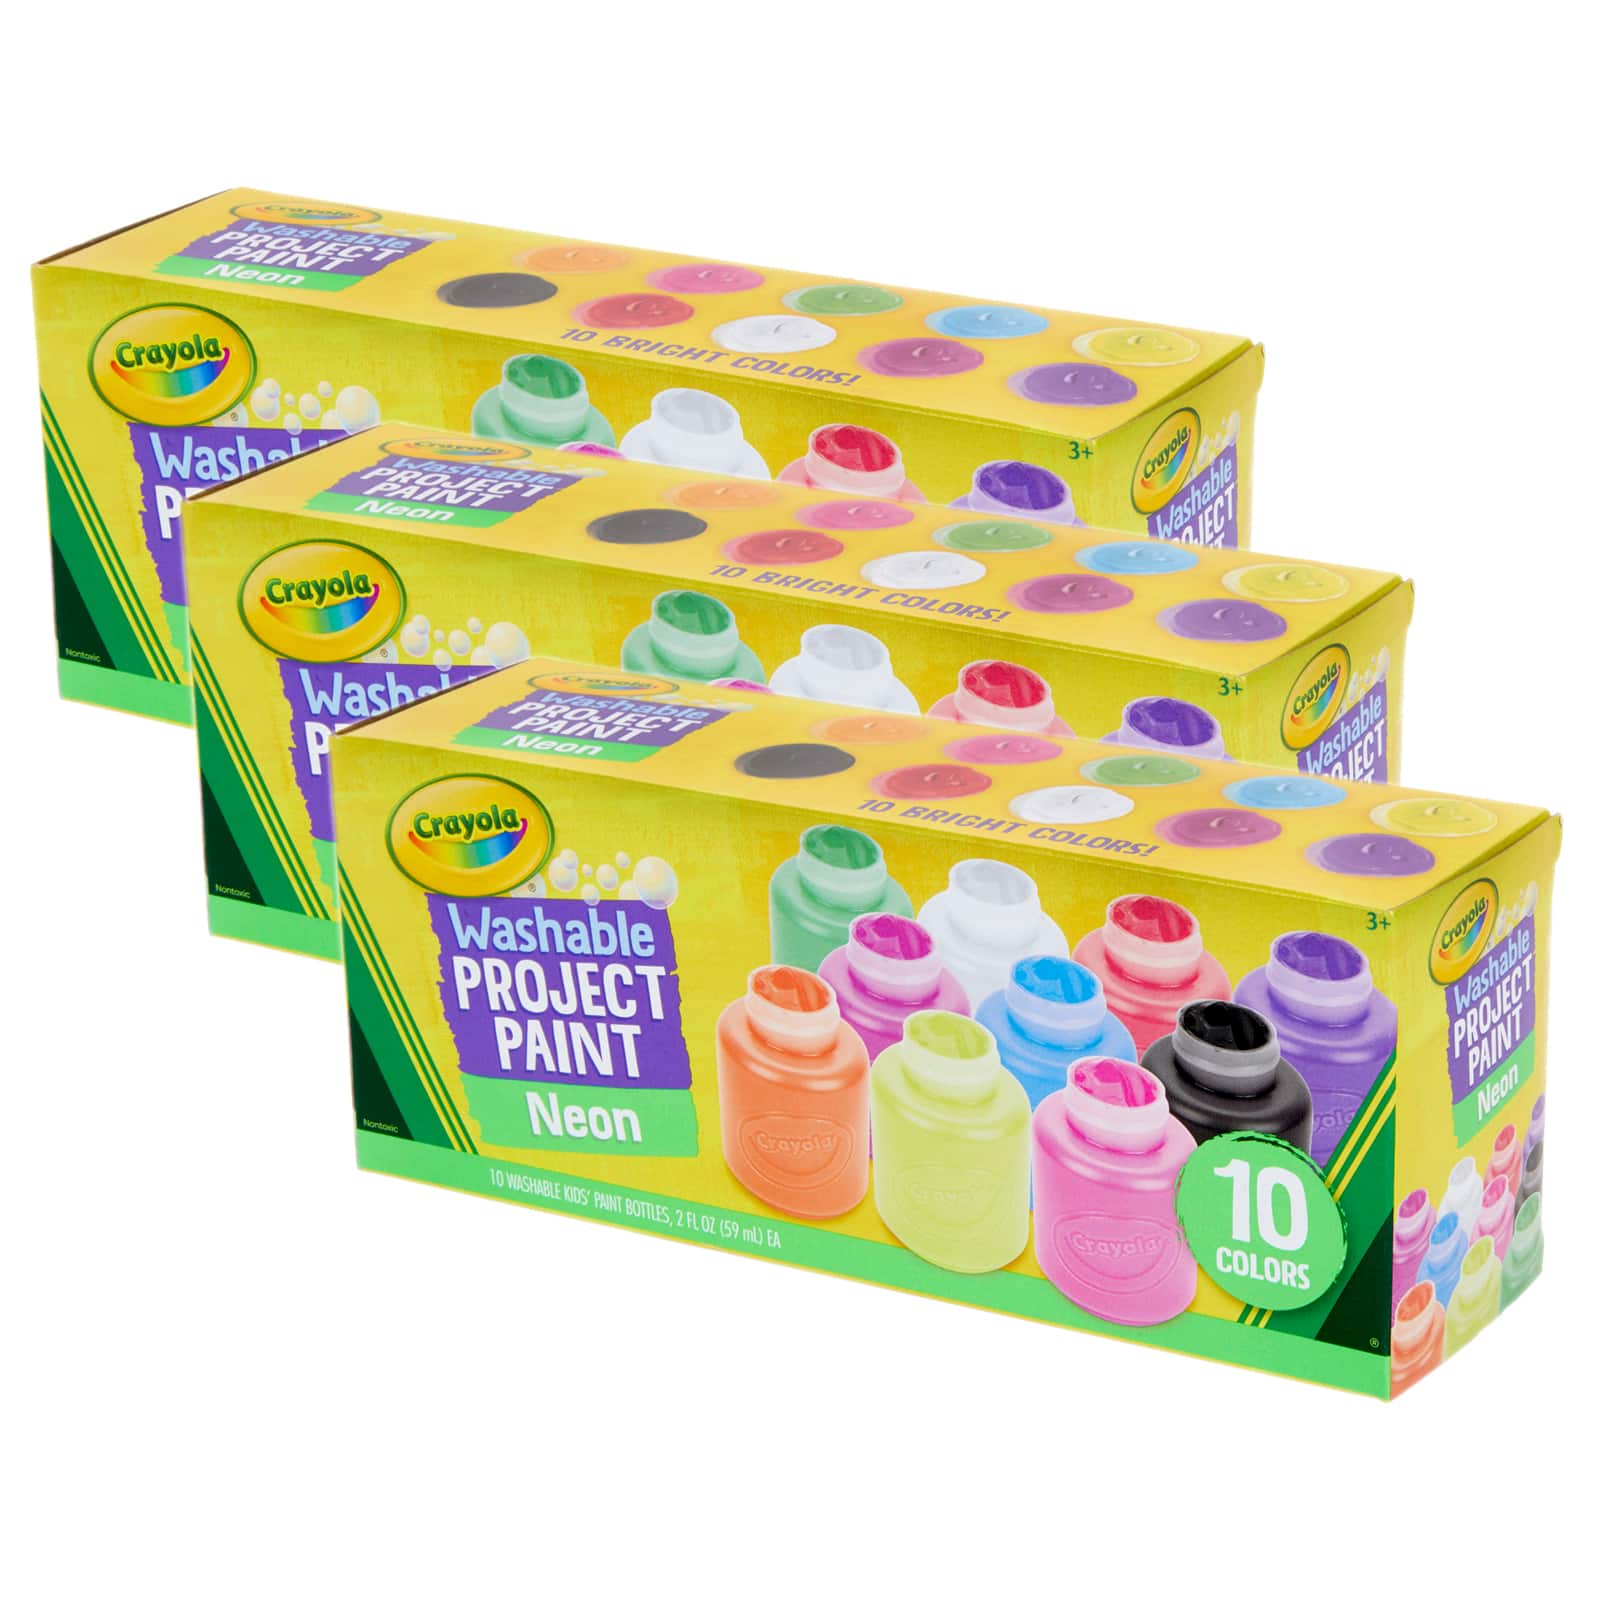 Crayola - With the 120 Crayola bright and colorful colors